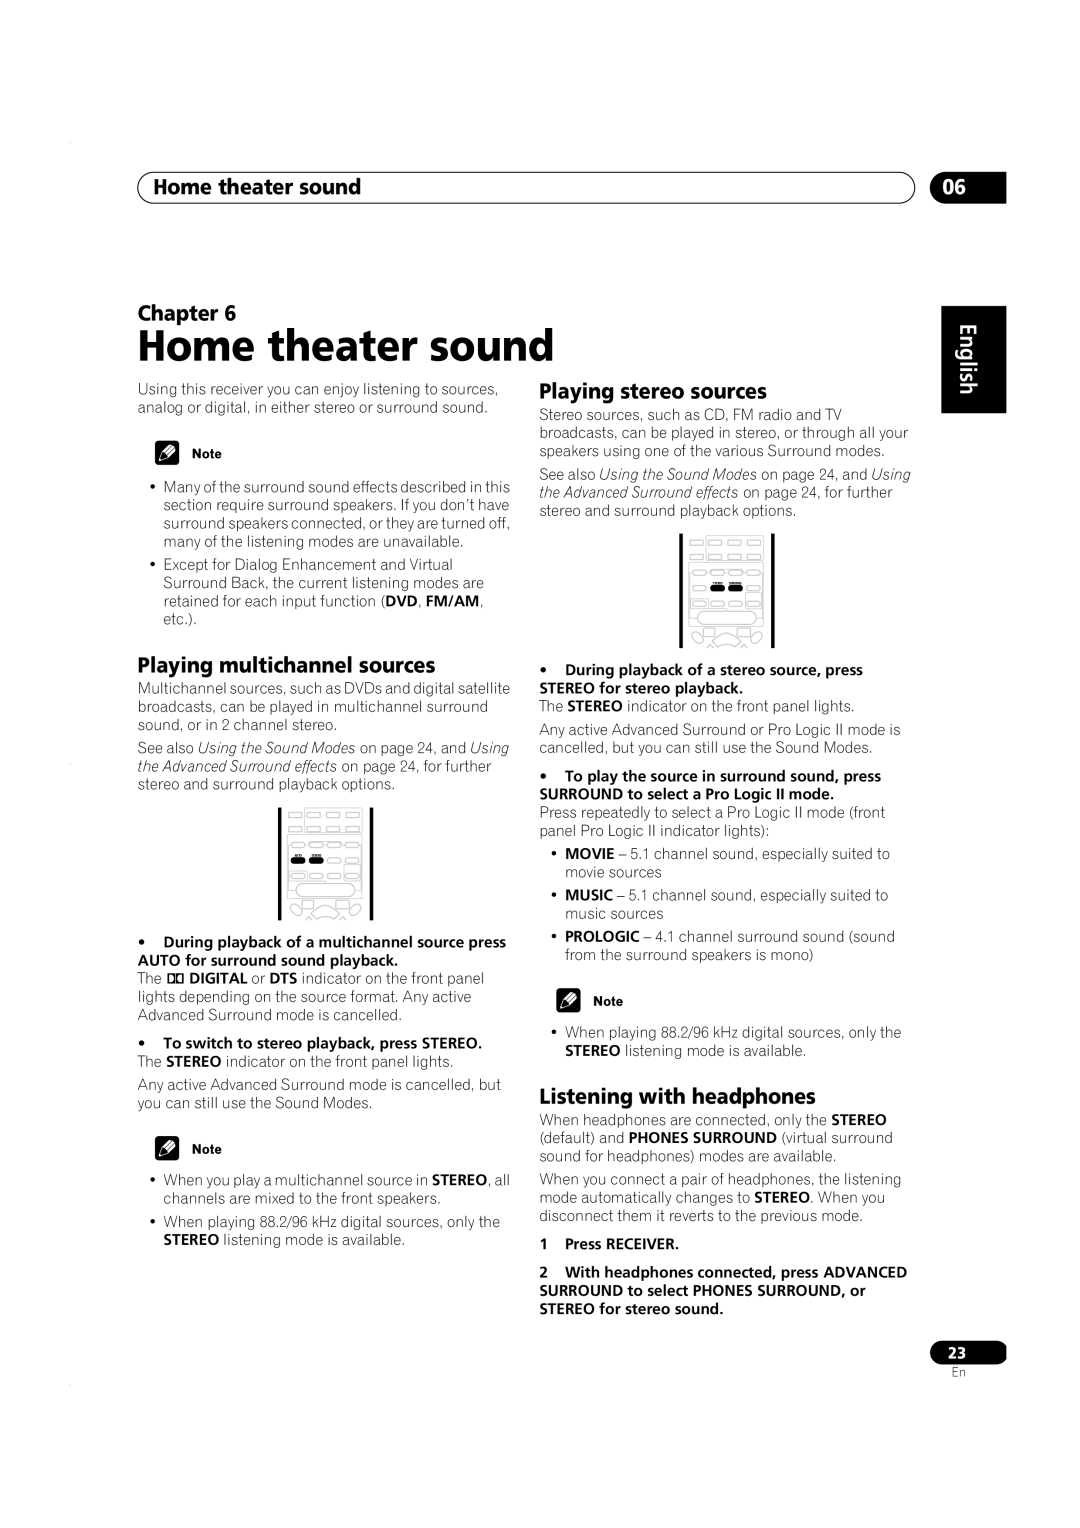 Pioneer VSX-C301 manual Home theater sound Chapter, Playing multichannel sources, Playing stereo sources, English 